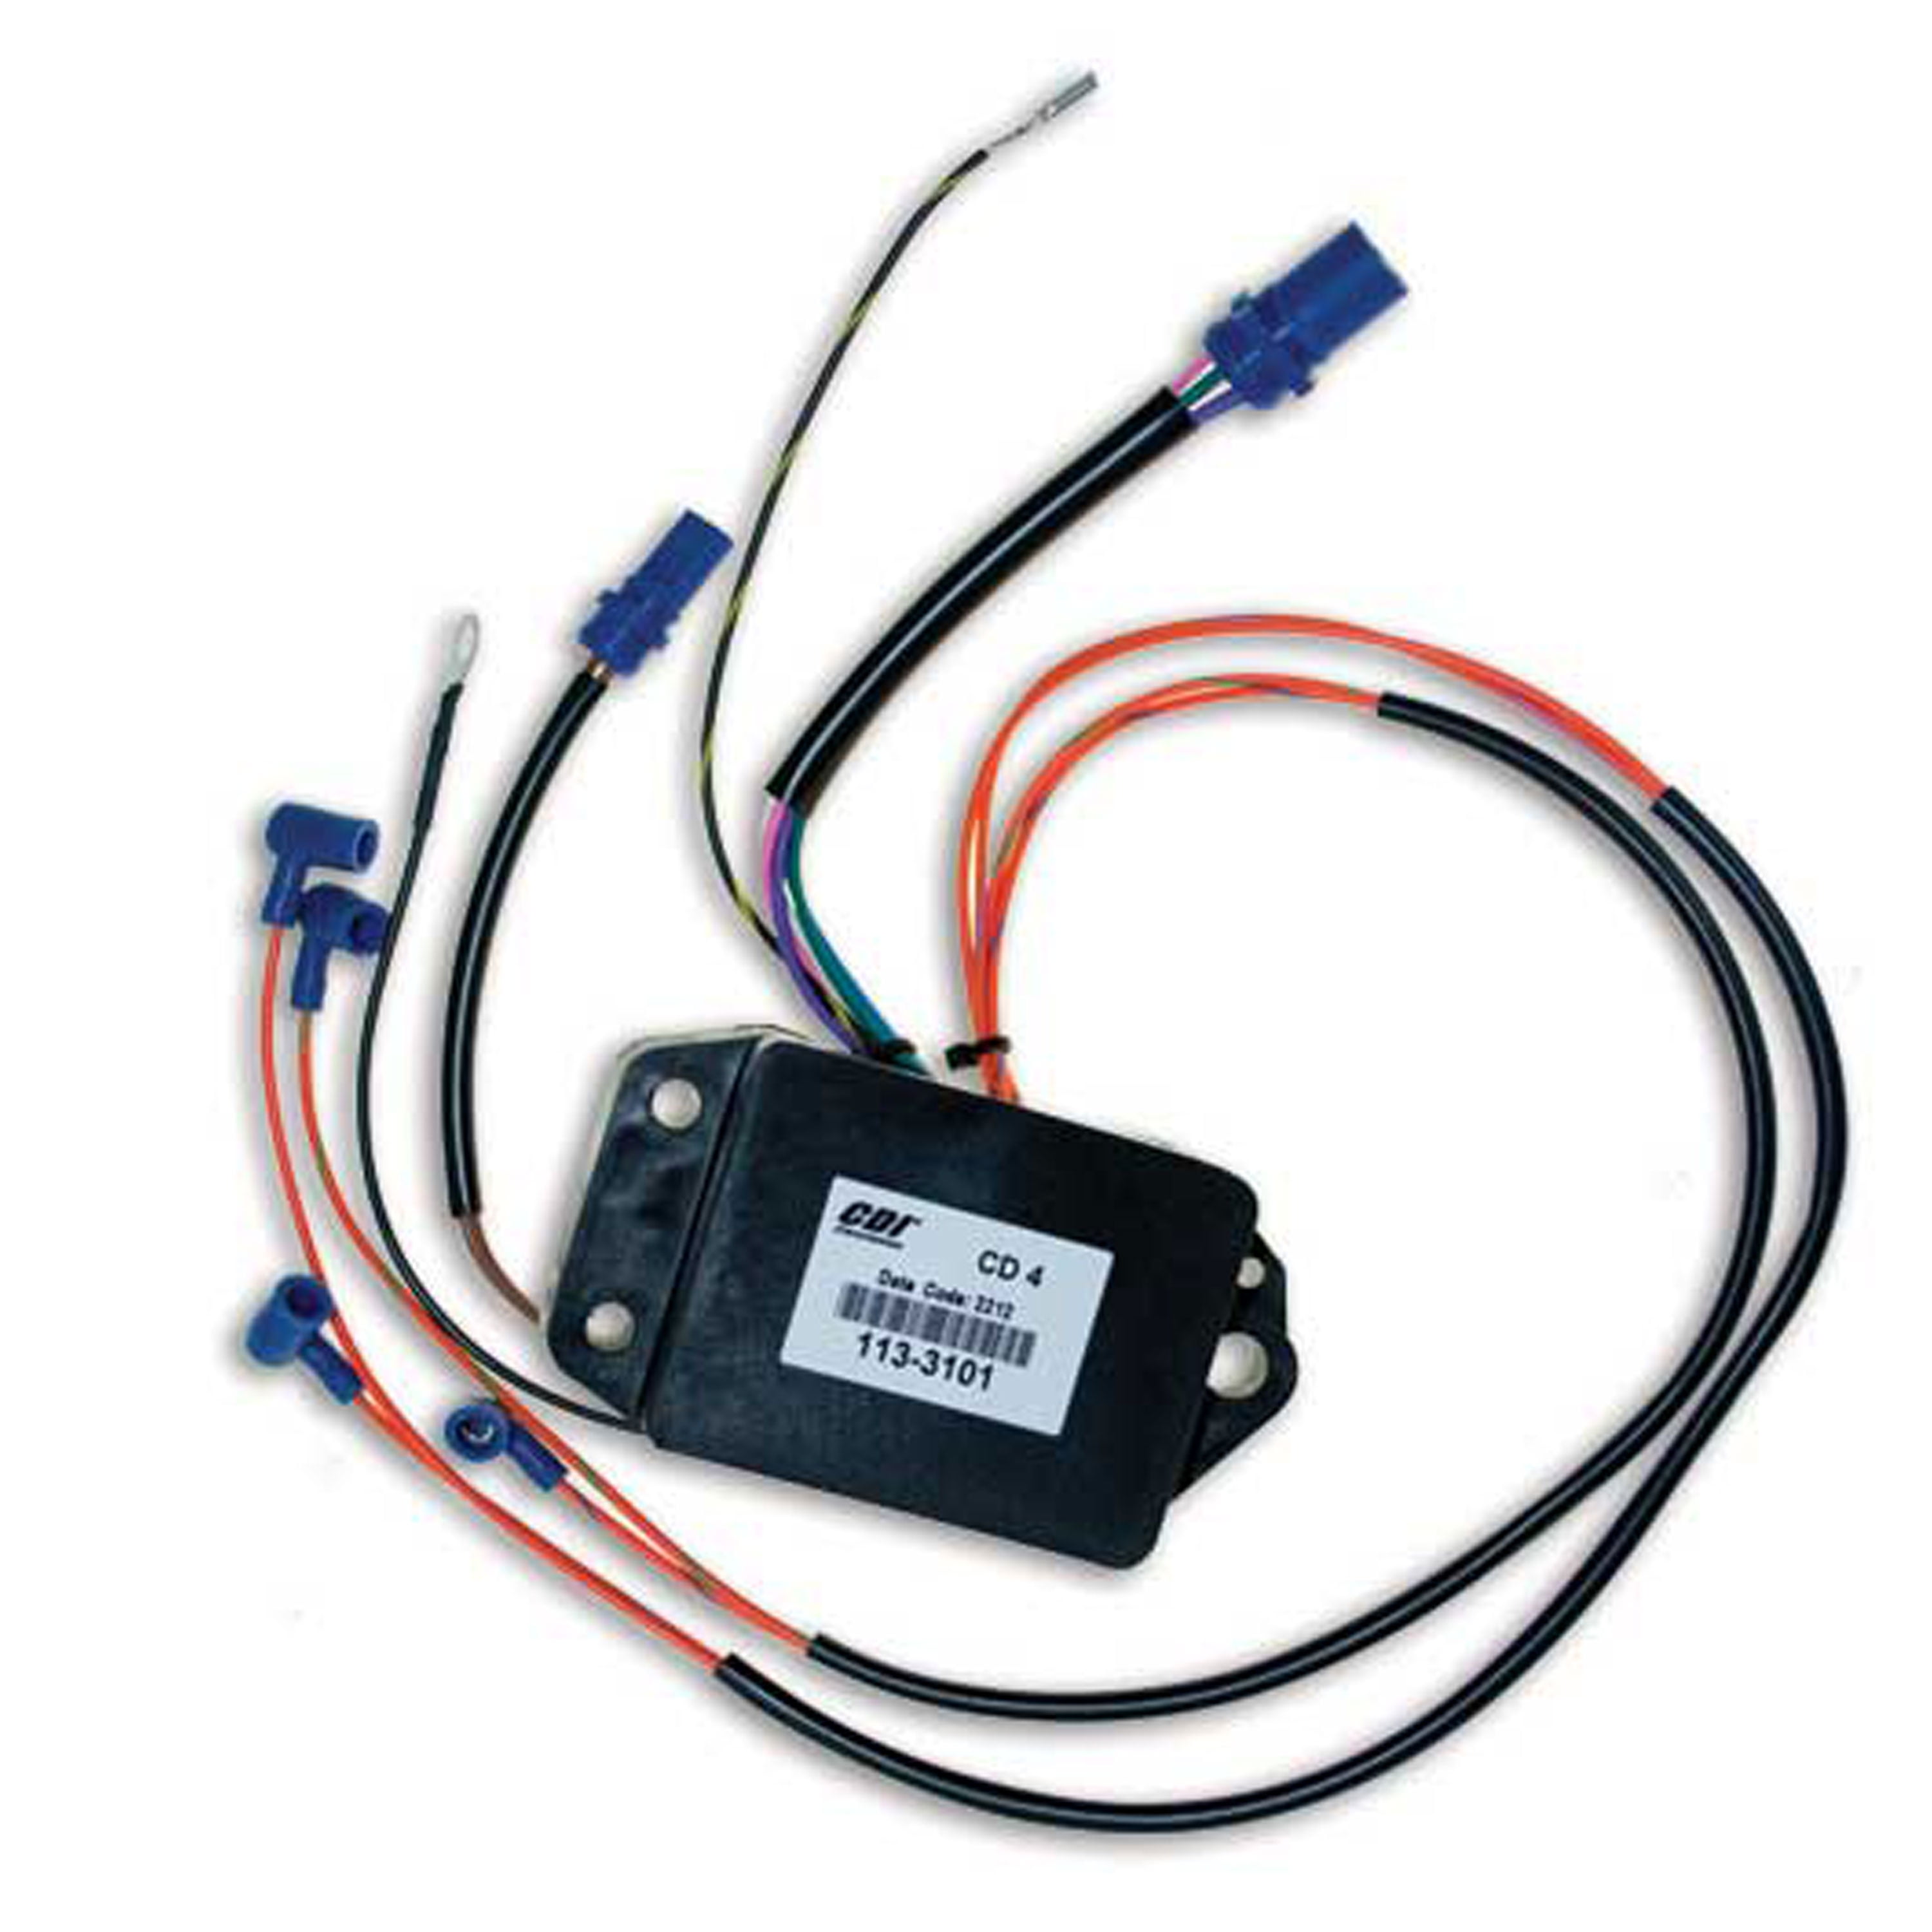 CDI Electronics 113-3101 Johnson/Evinrude Power Pack - 4/8 Cyl (1986